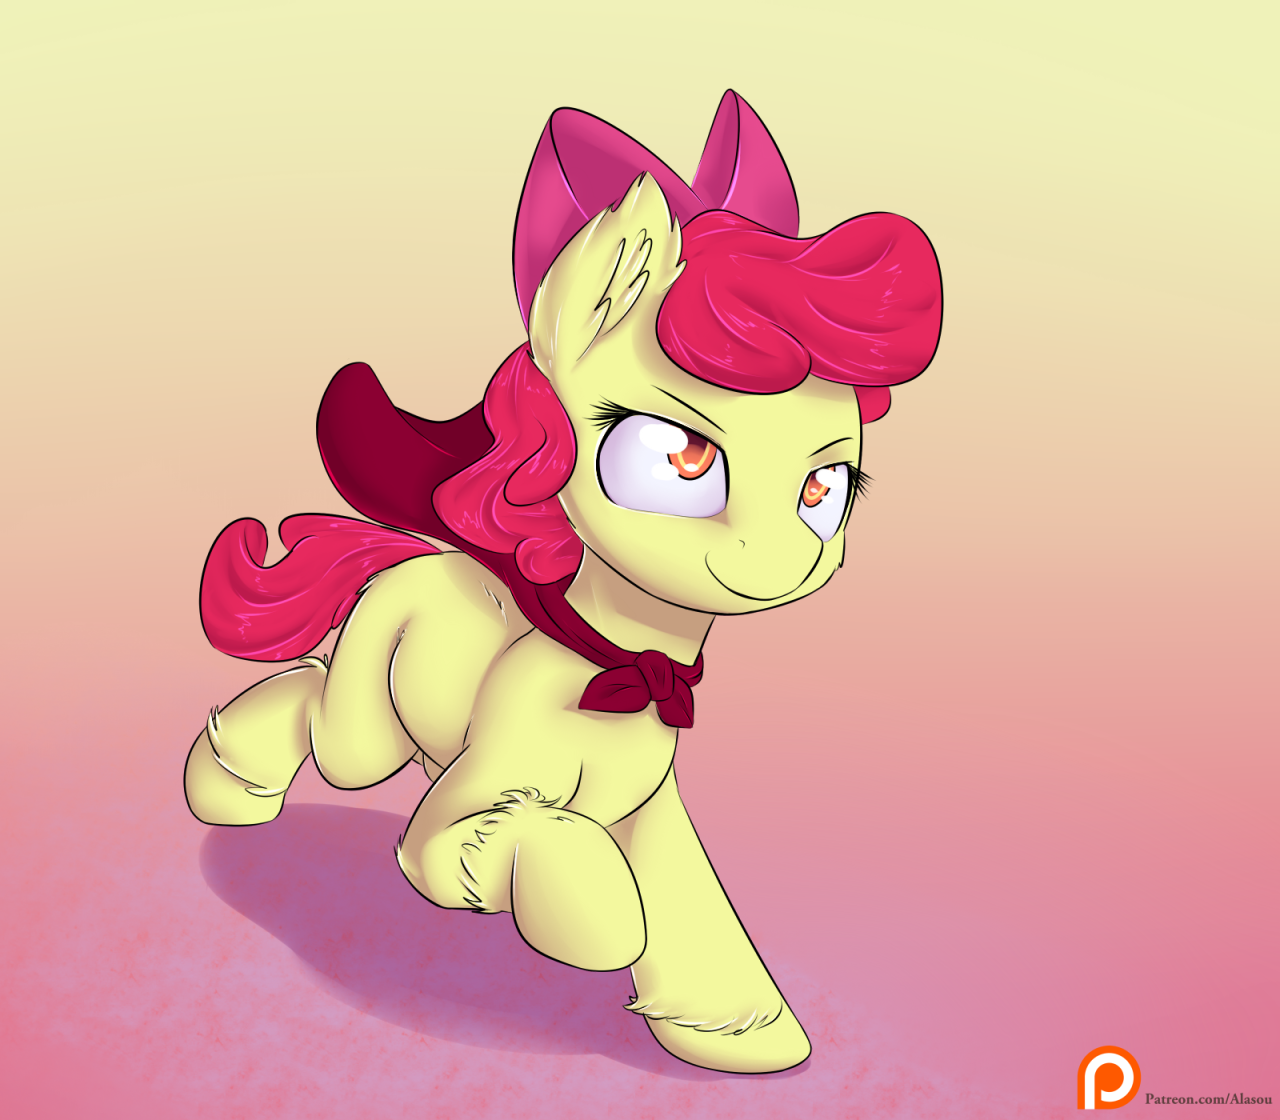 alasou:  I bet you didn’t see that one coming! I started with fluffy filly mane6,